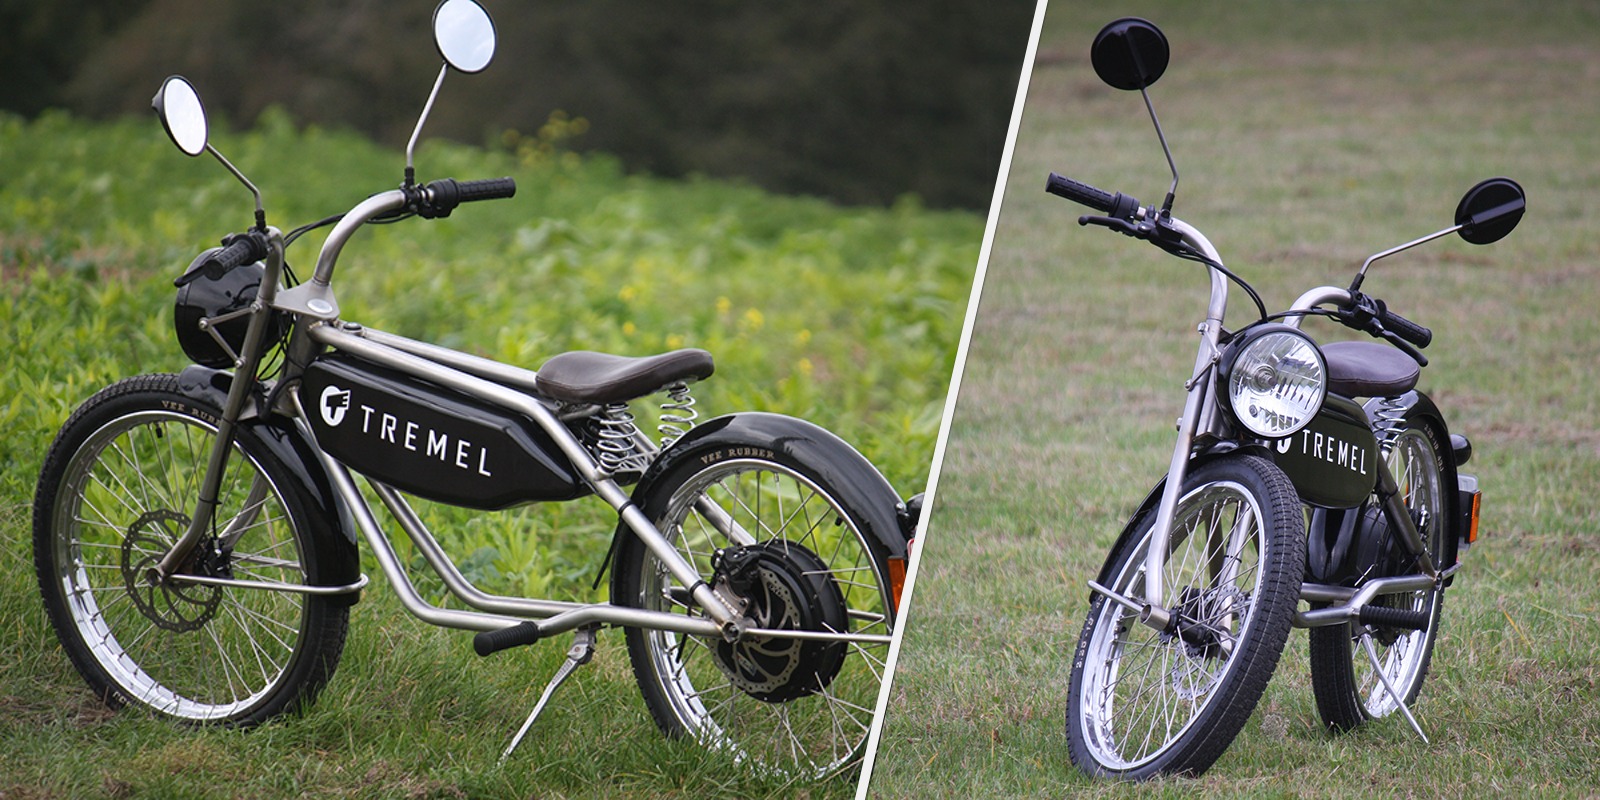 Tremel Zimmner 3 kW electric moped has 